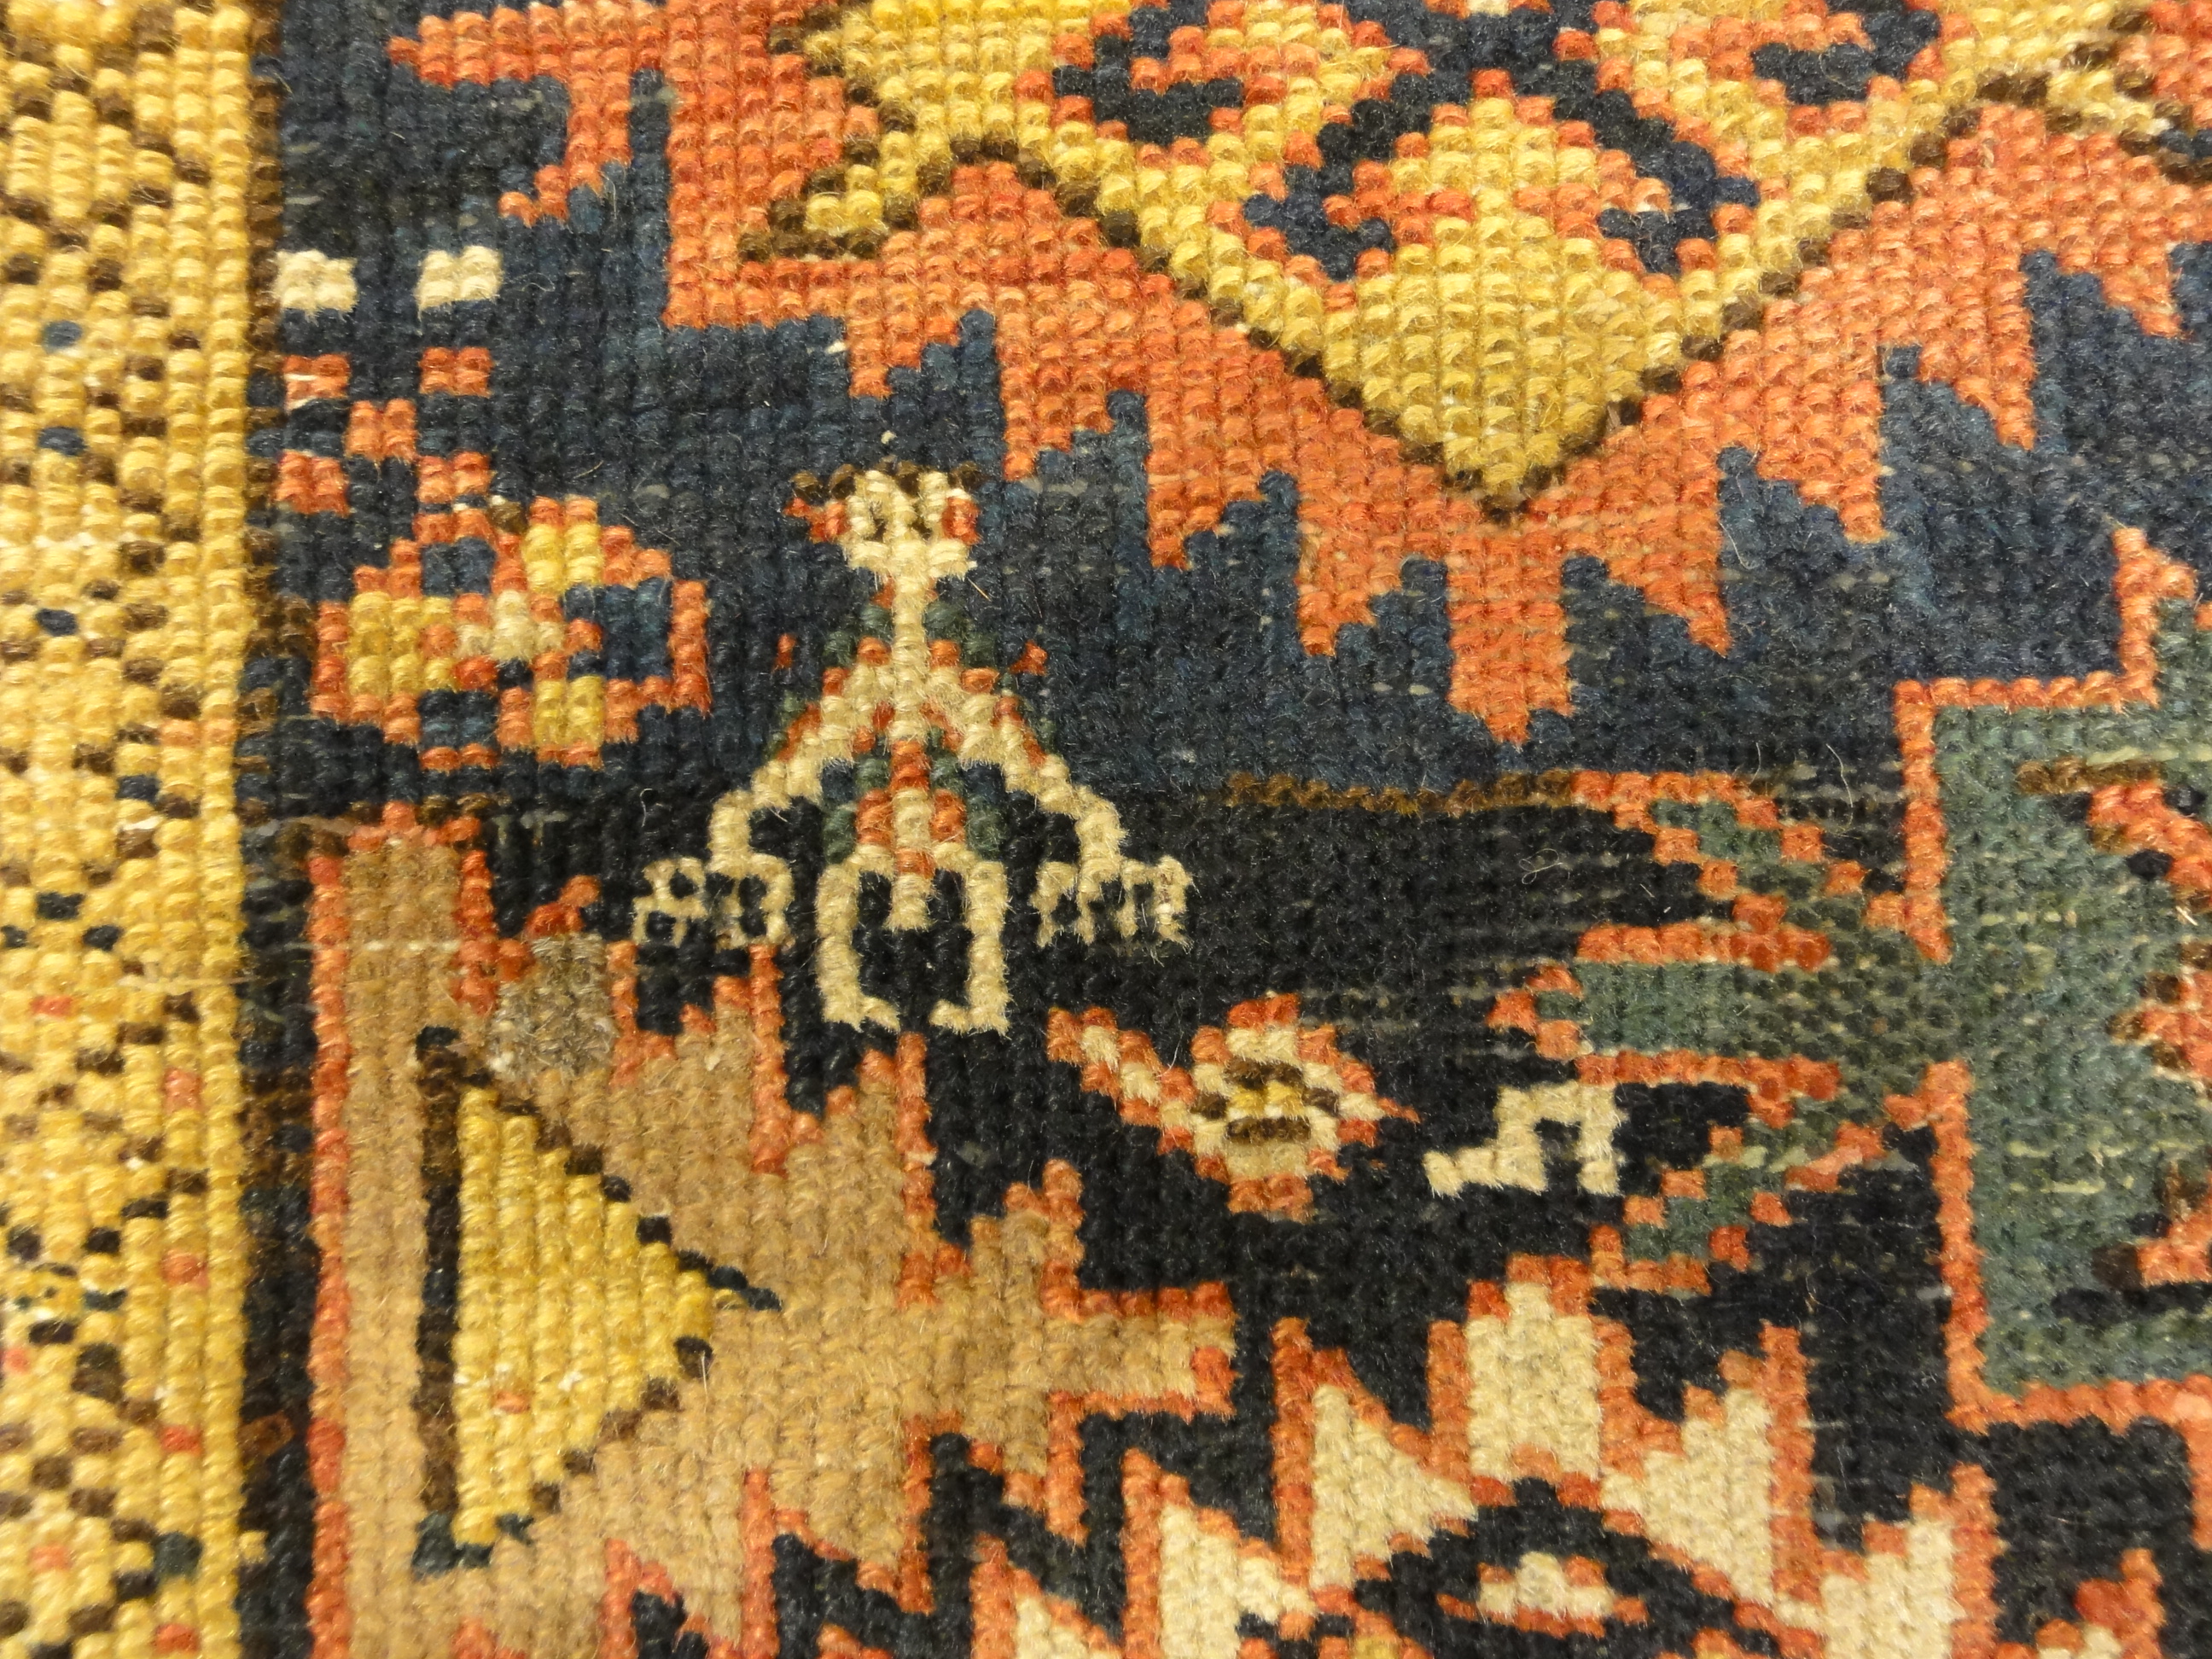 Antique Shirvan Runner Rug. A piece of authentic antique genuine woven carpet art sold by Santa Barbara Design Center, Rugs and More.